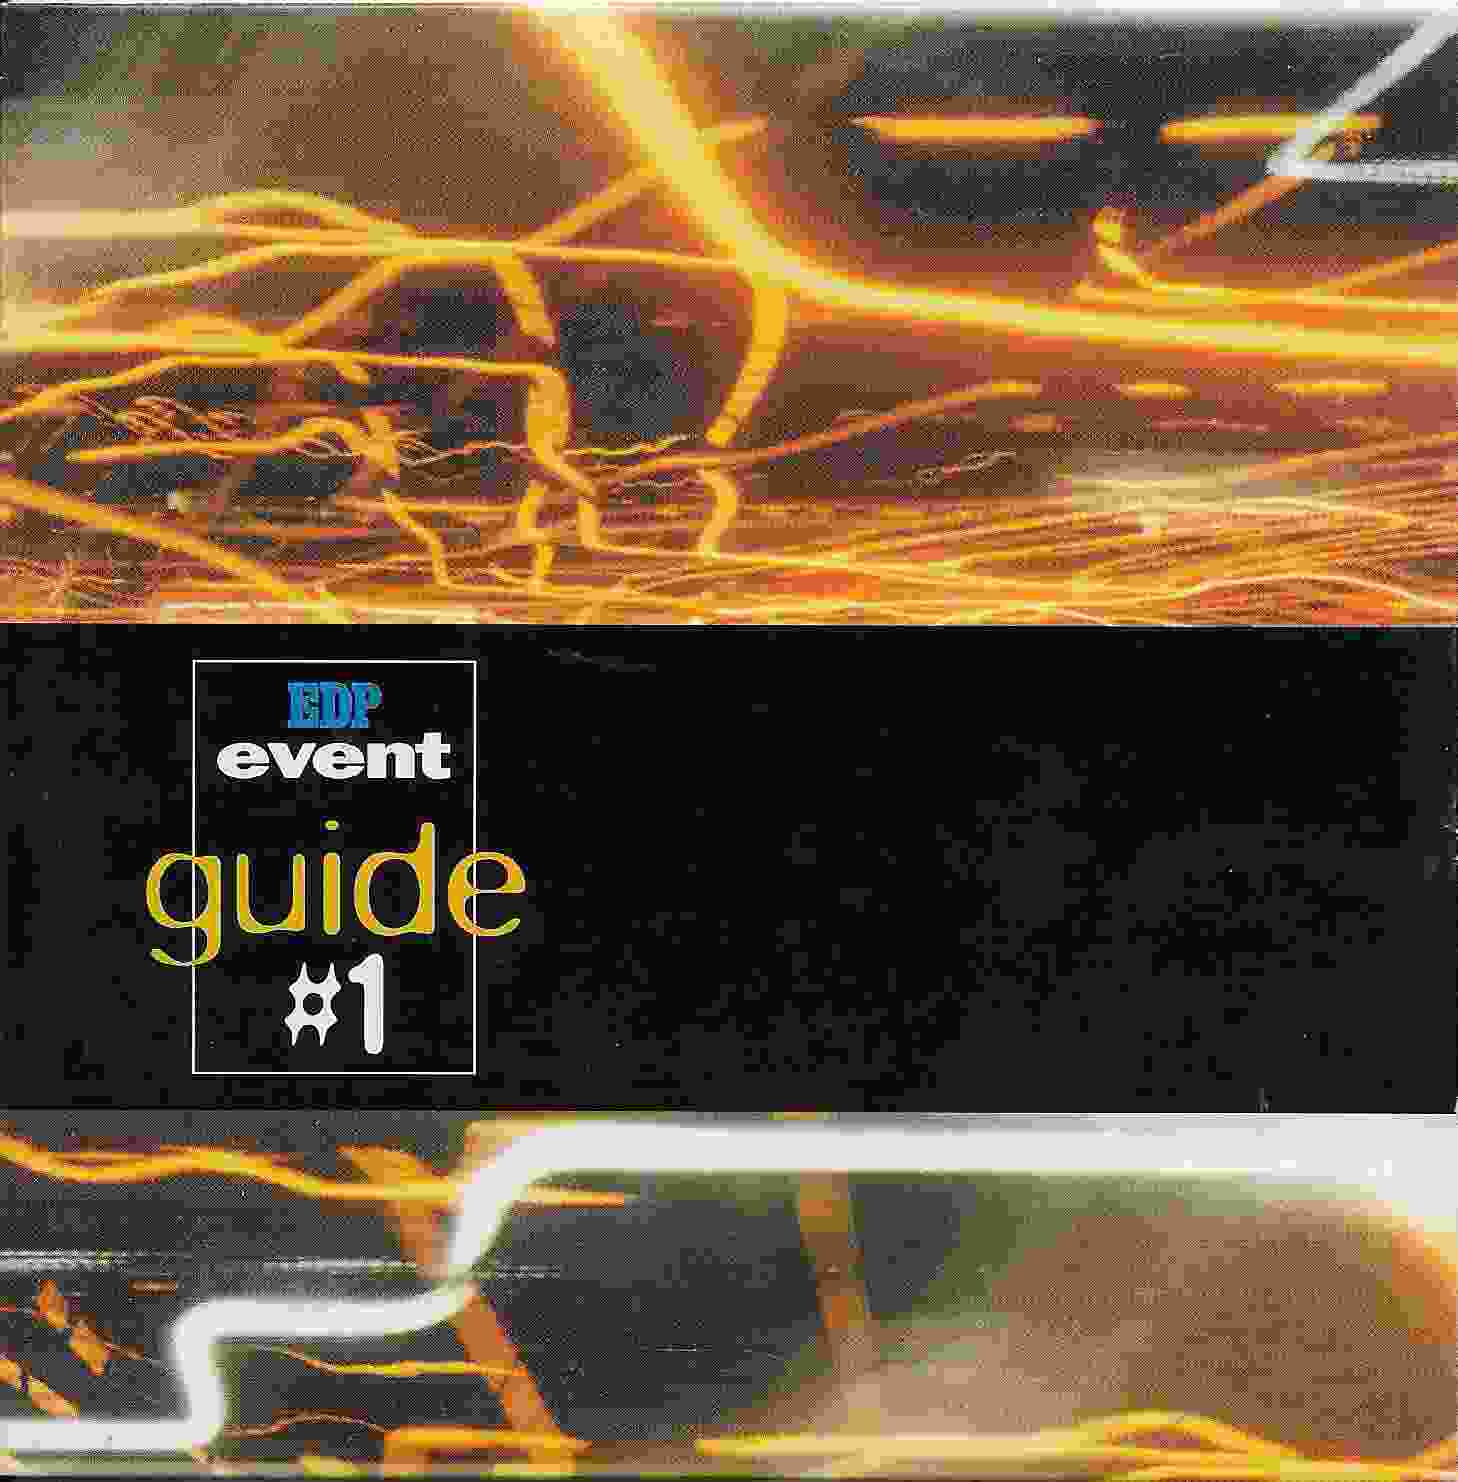 Picture of THE GUIDE 1 EDP event guide #1 by artist Various 